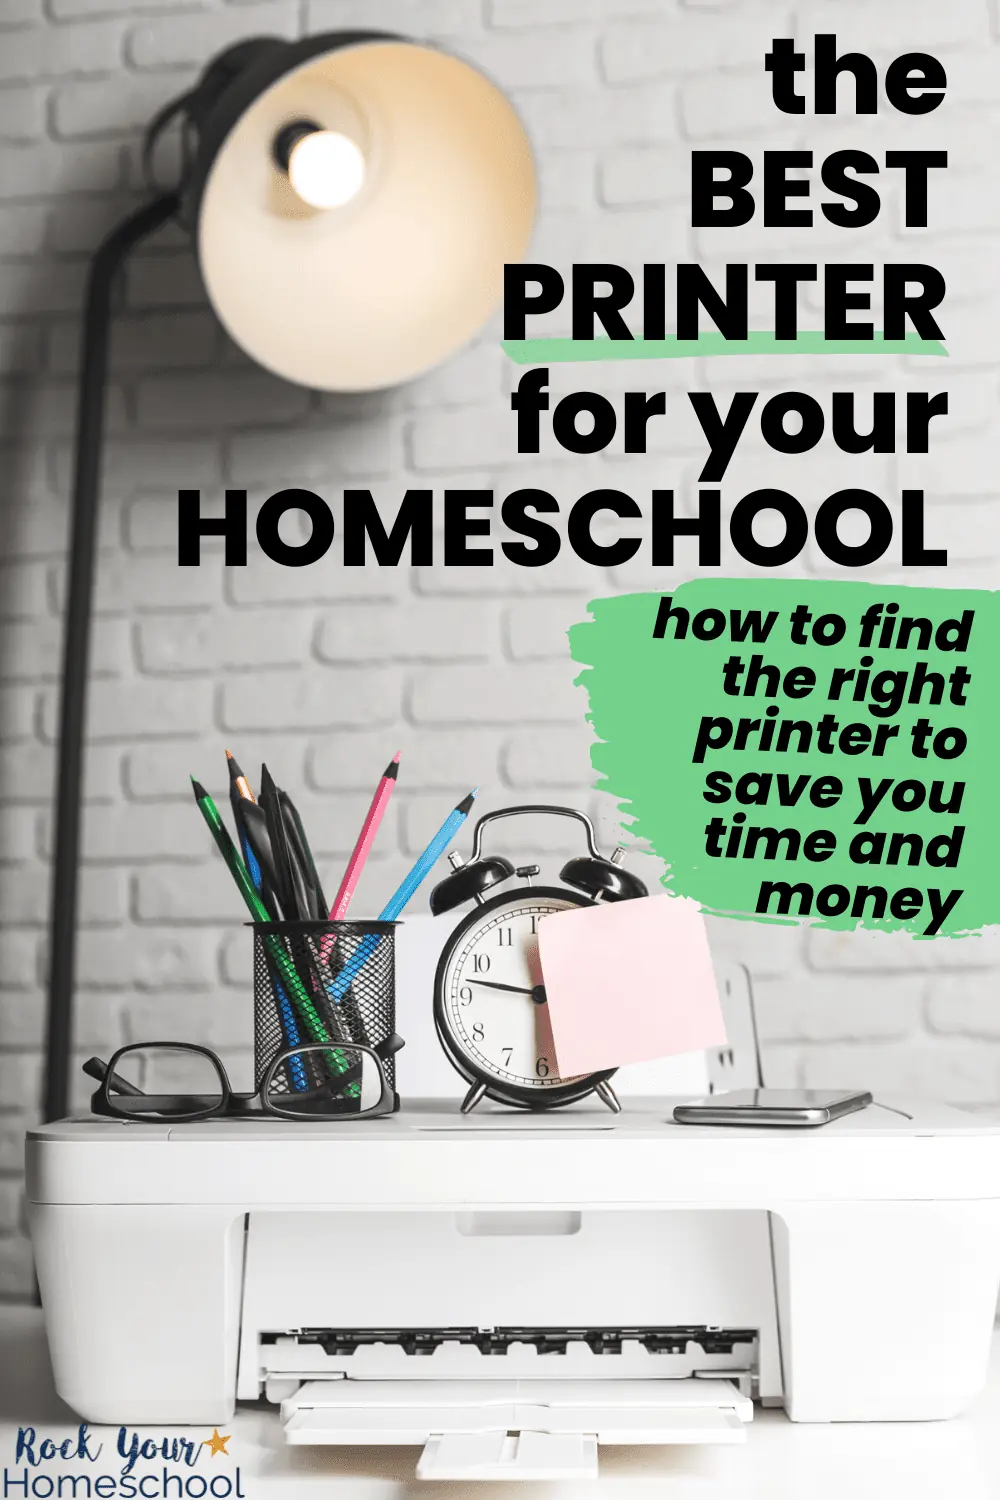 The Best Printer for Your Homeschool Family: 5 Surprising Yet Smart Things to Consider